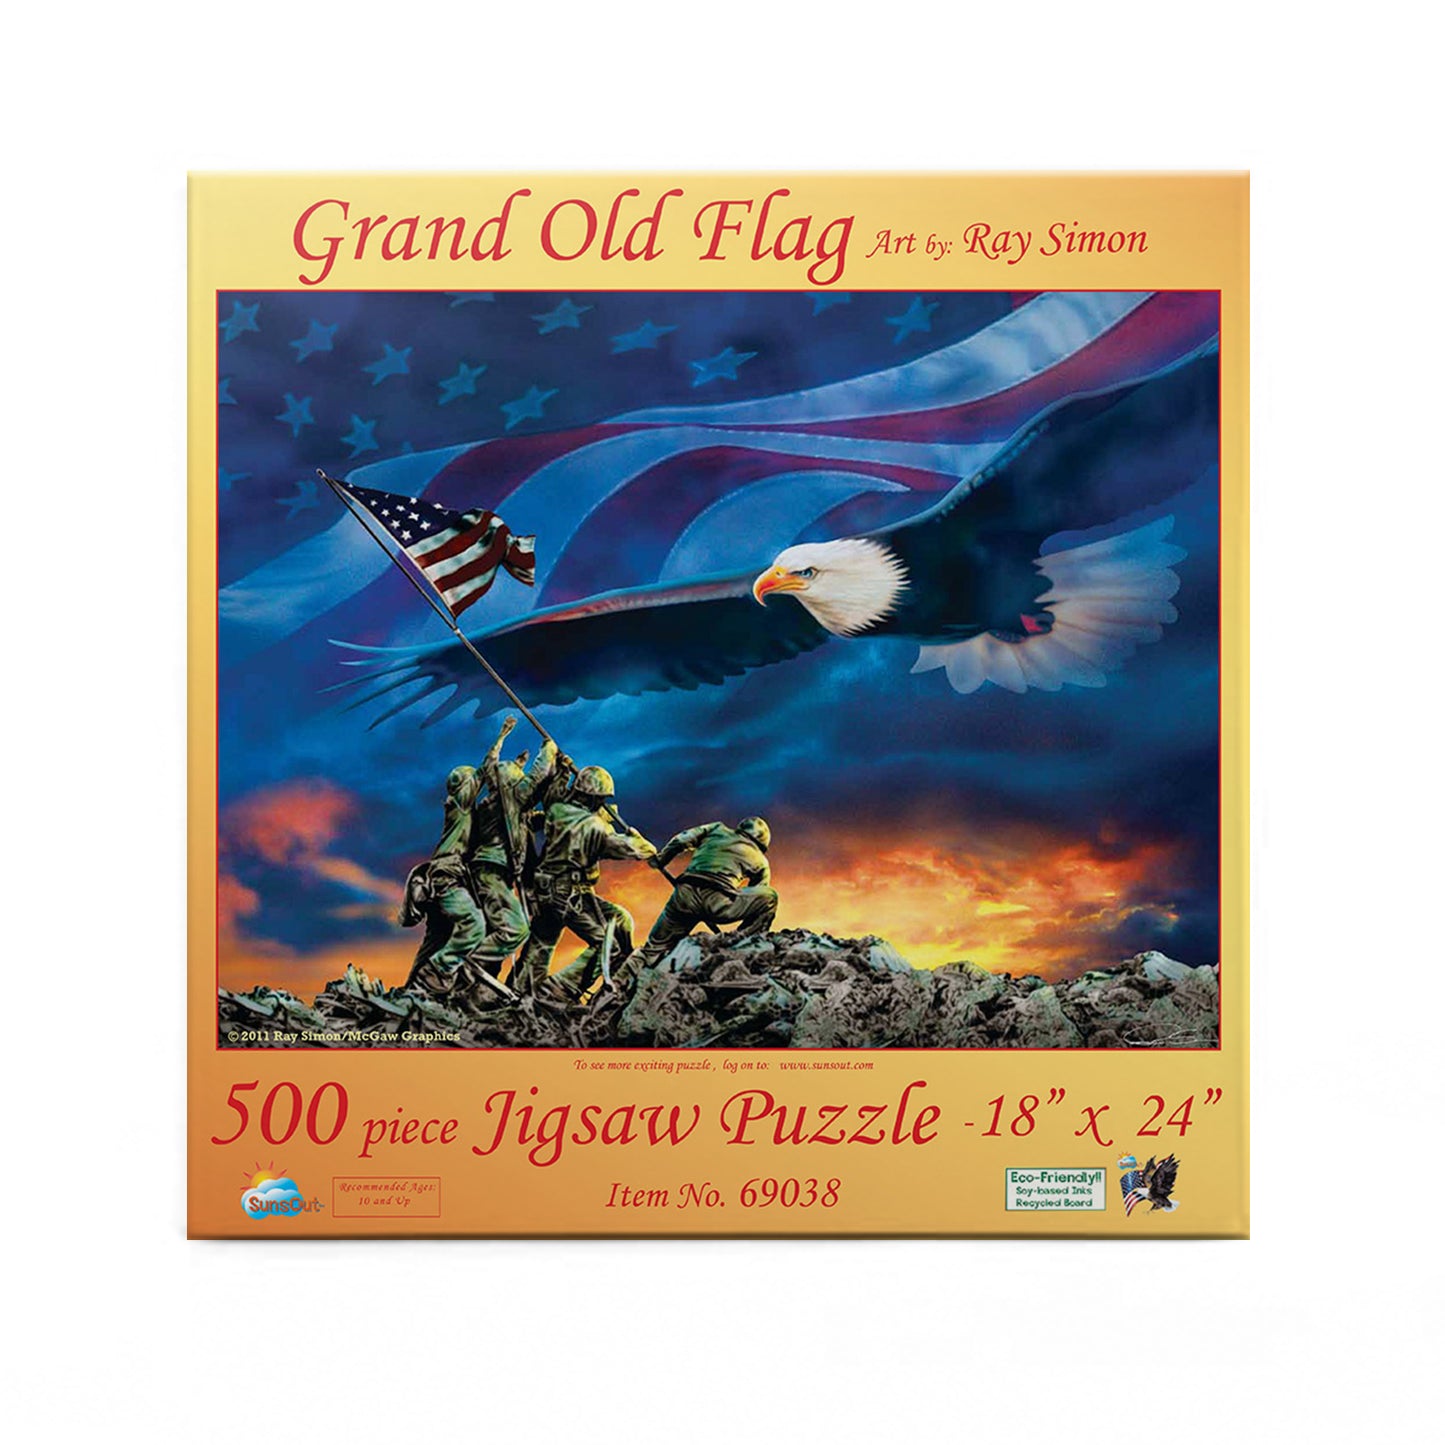 Grand Old Flag(16) - 500 Piece Jigsaw Puzzle